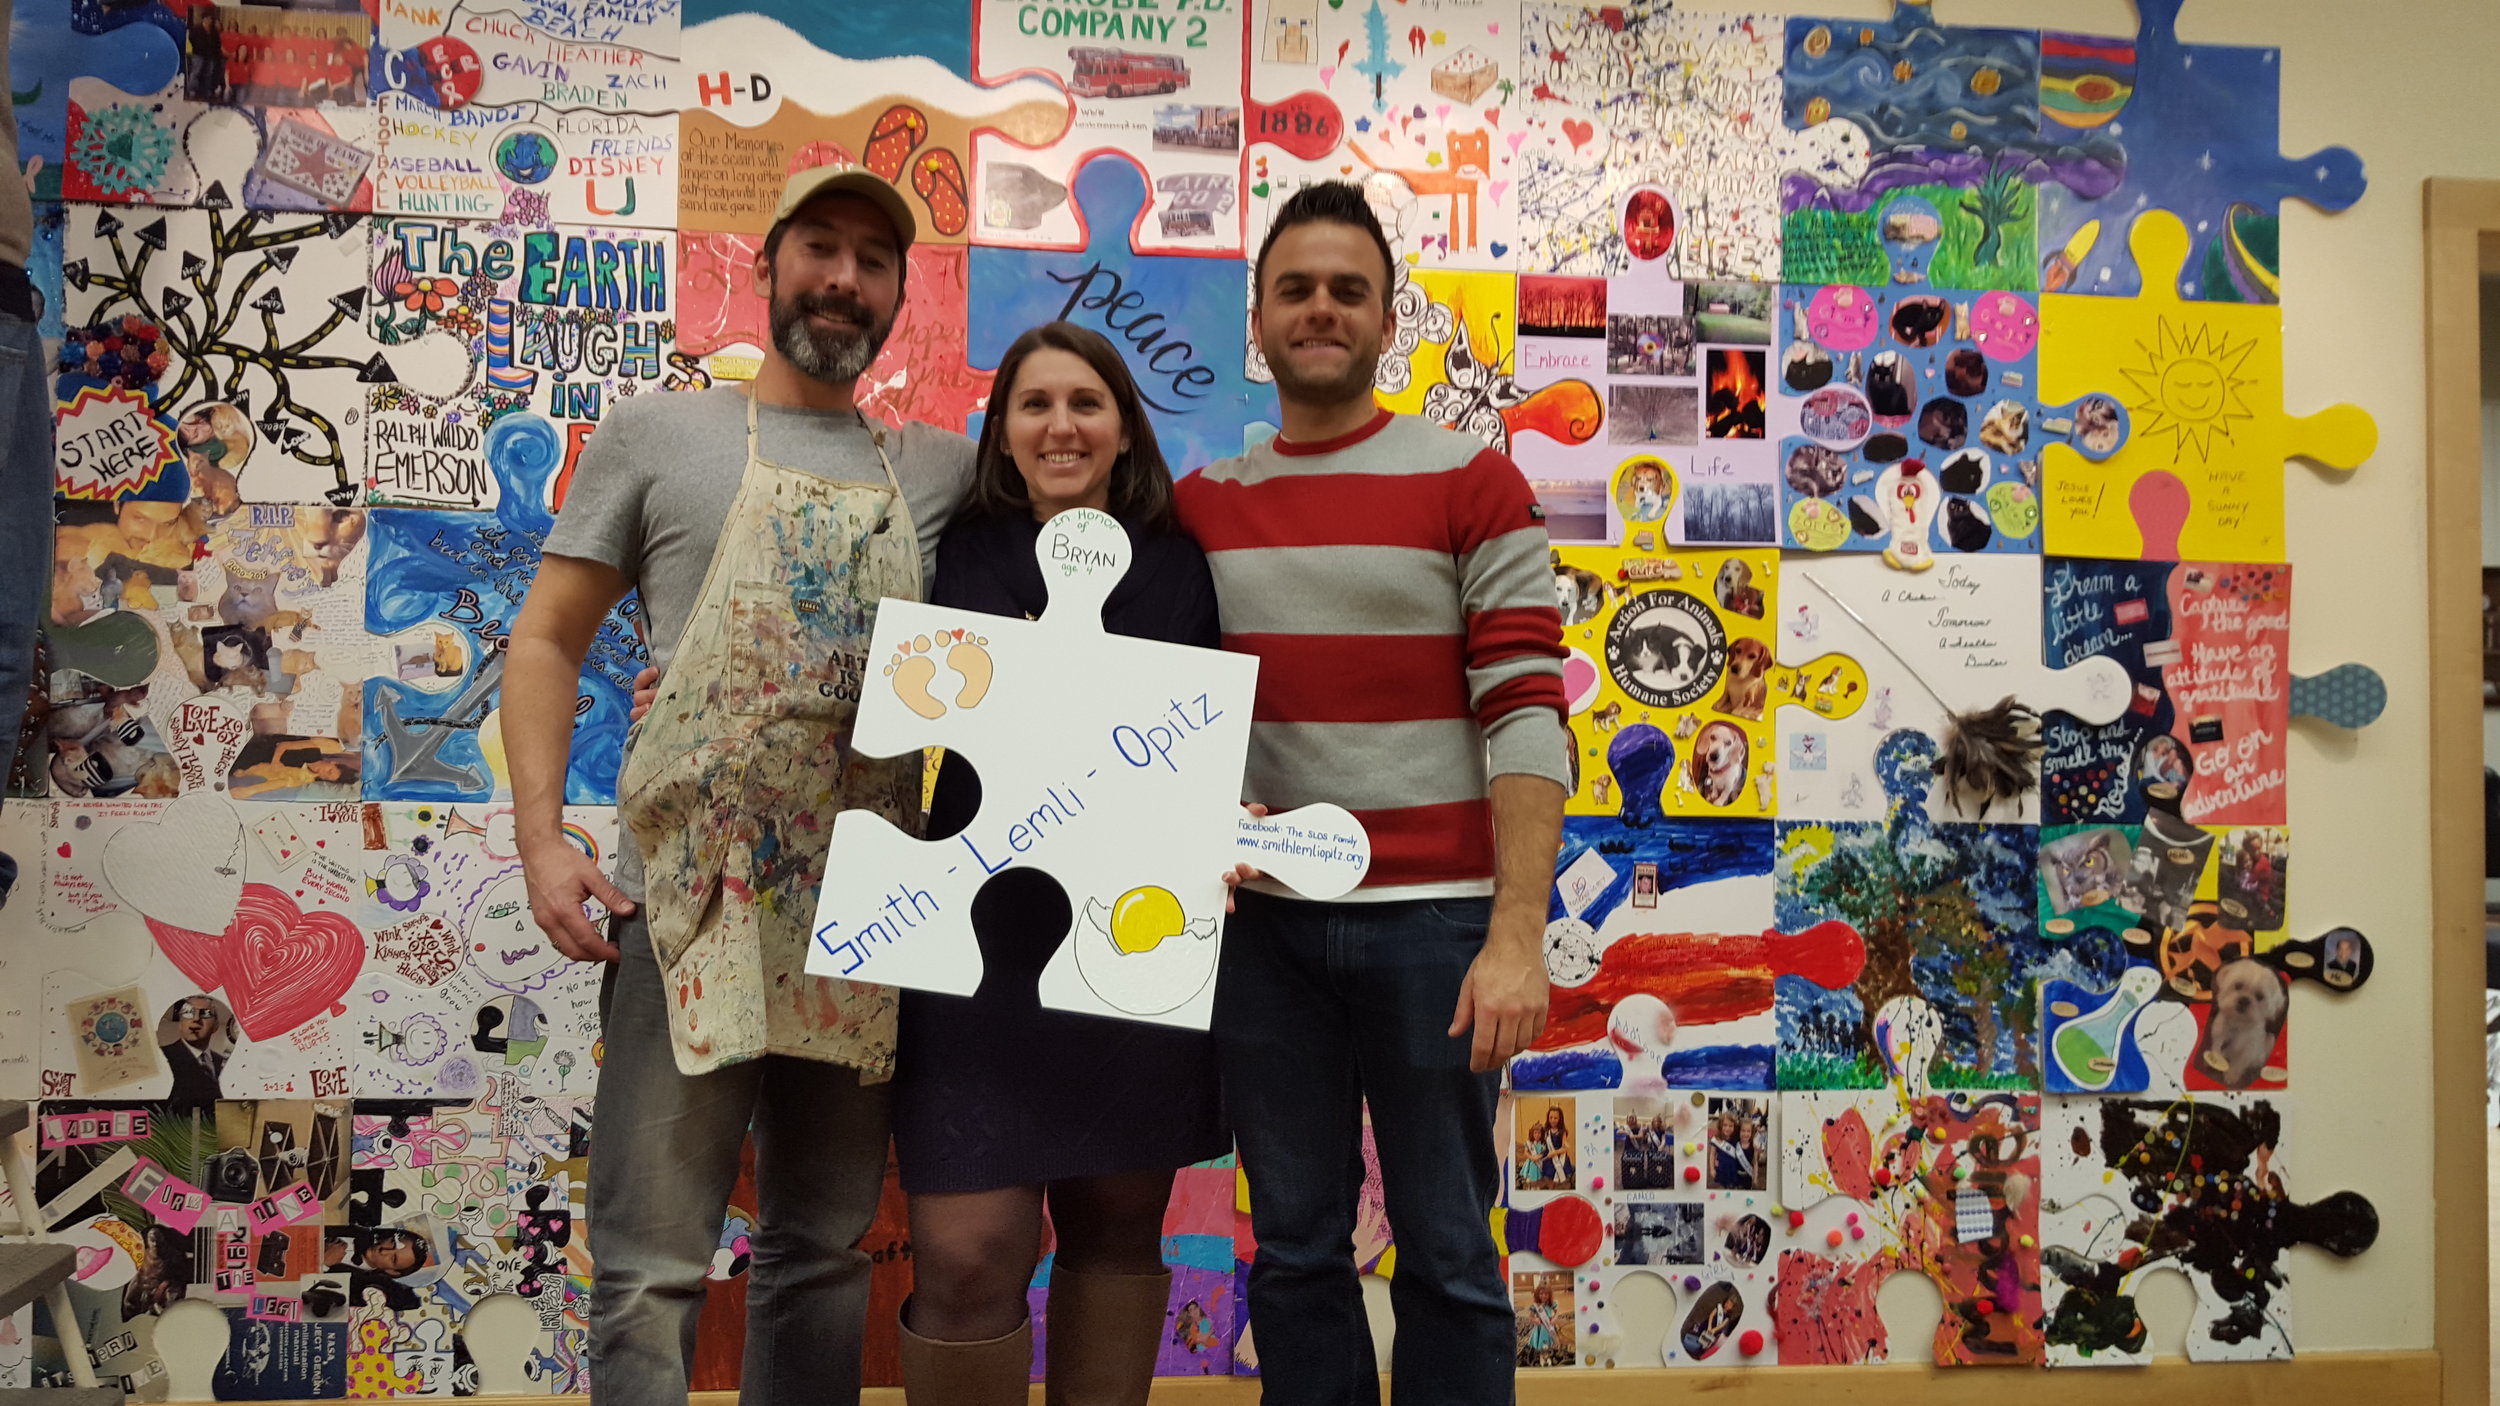 We're Not Complete Without You: A Collaborative Puzzle Art Project